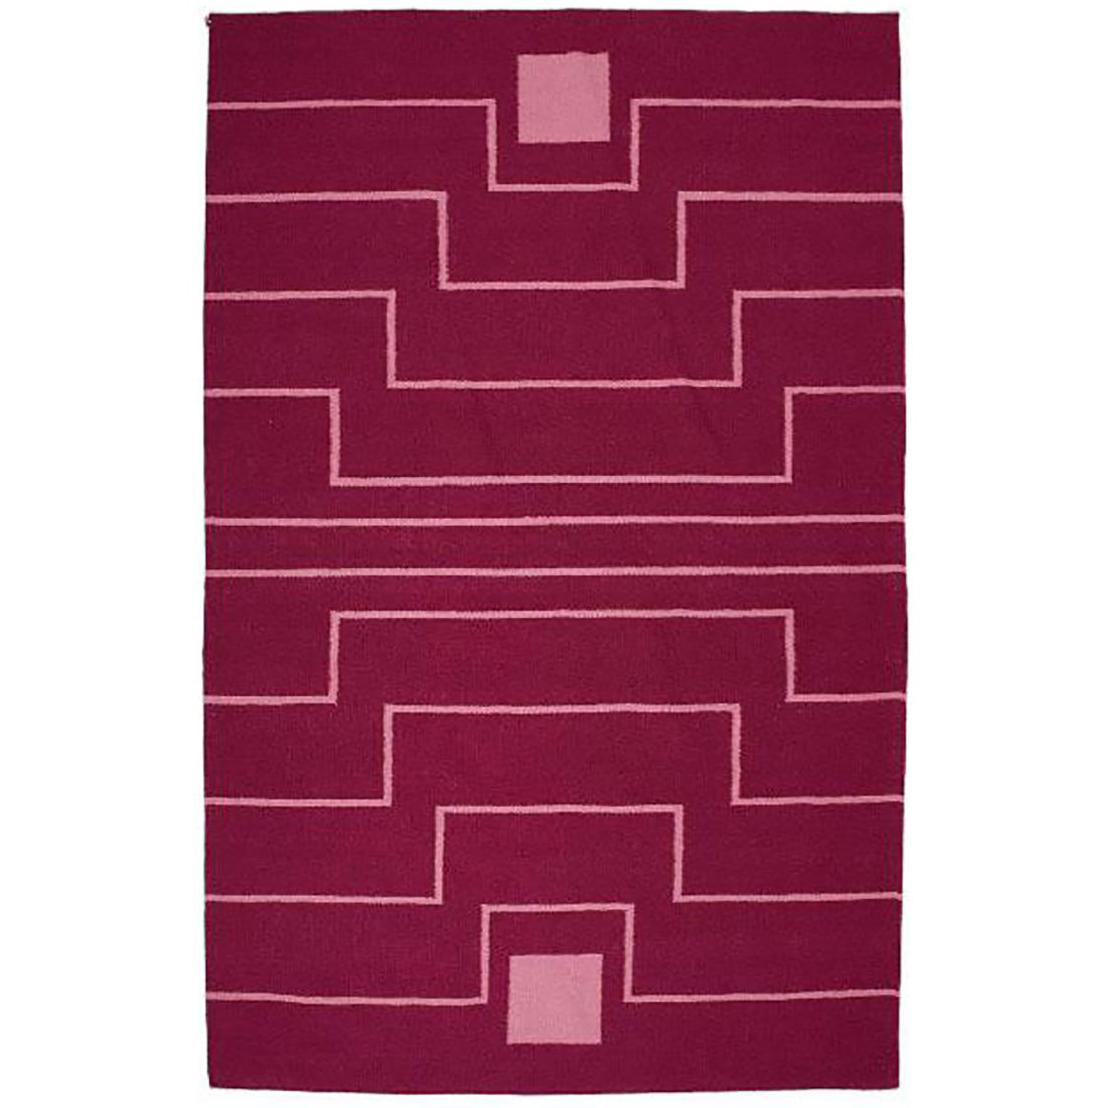 Tribal Inspired Flat-Woven Dhurrie Red Maroon Pink Graphic Rug 5'x8'